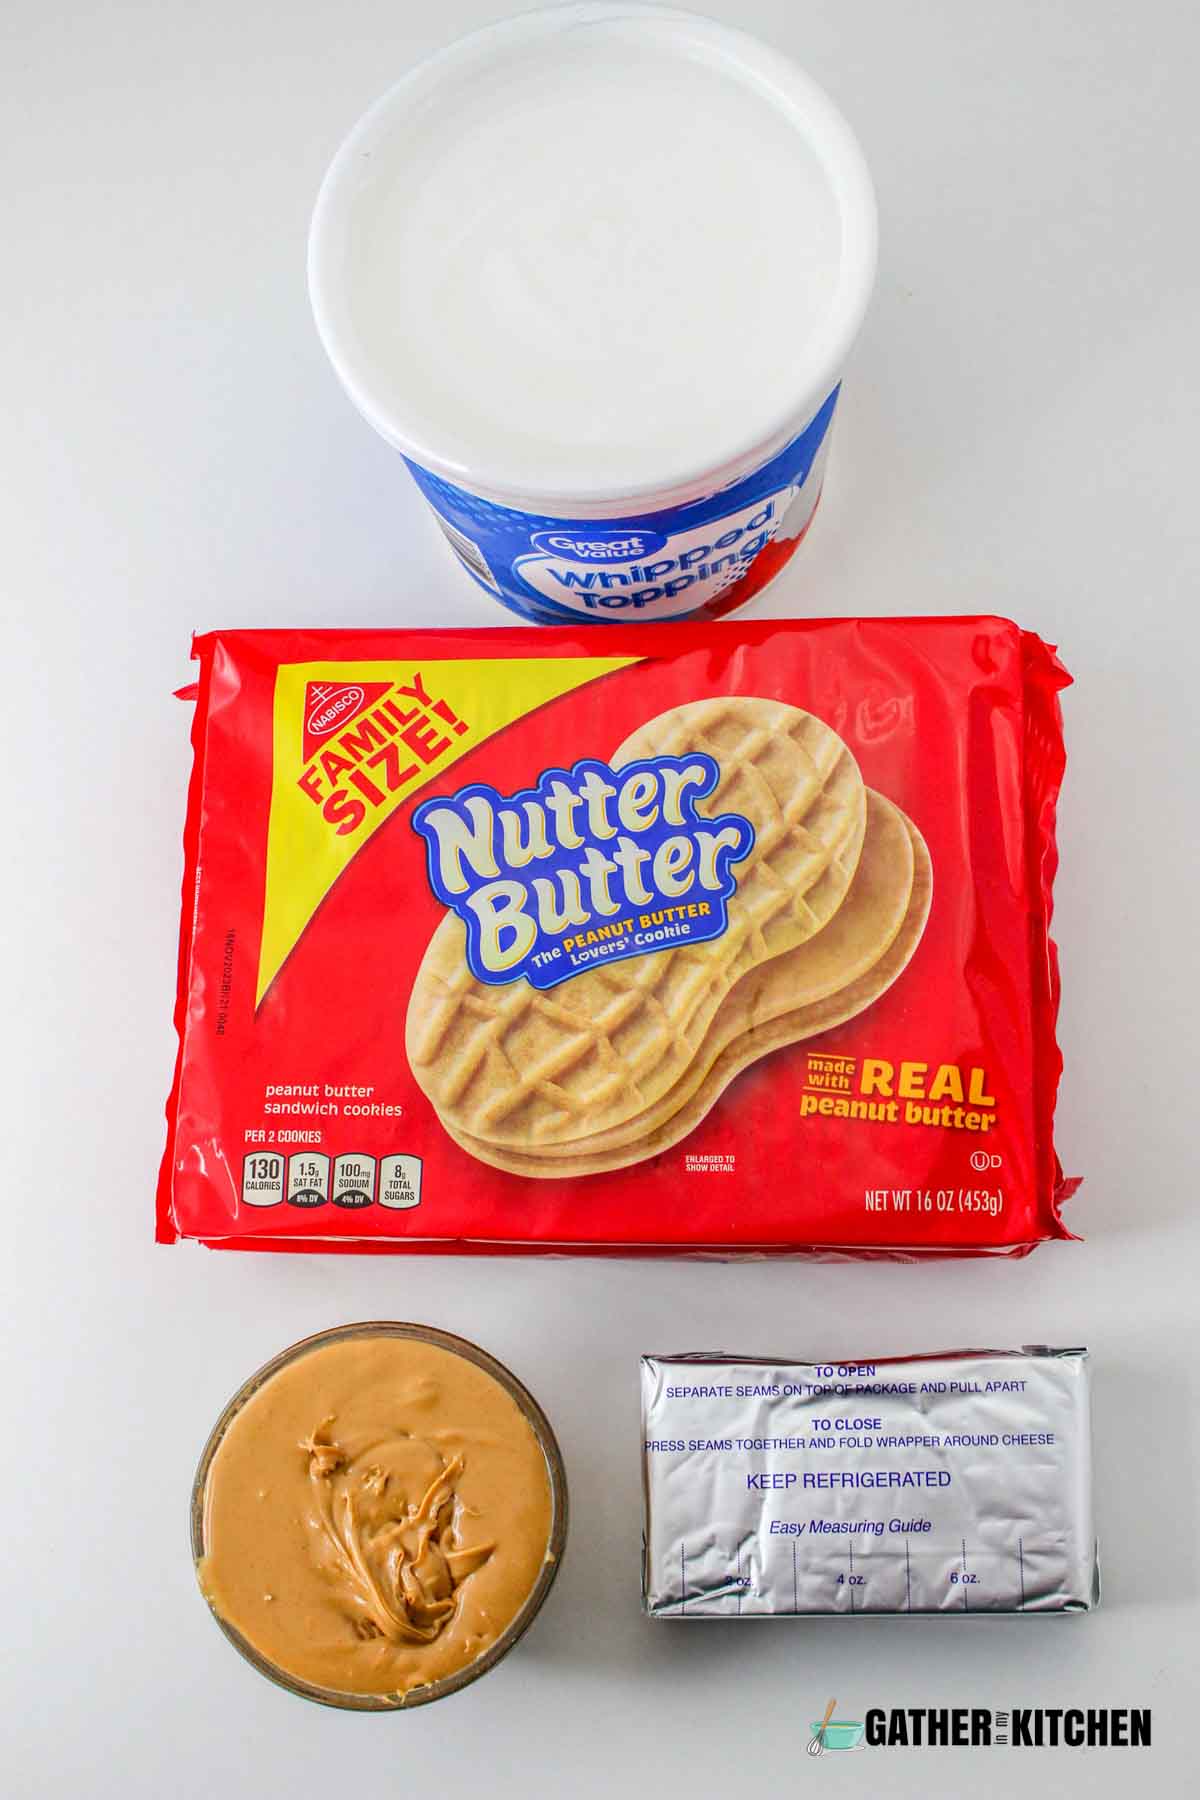 Ingredients for making peanut butter ice box cake: whipped topping, Nutter Butters, peanut butter and cream cheese.